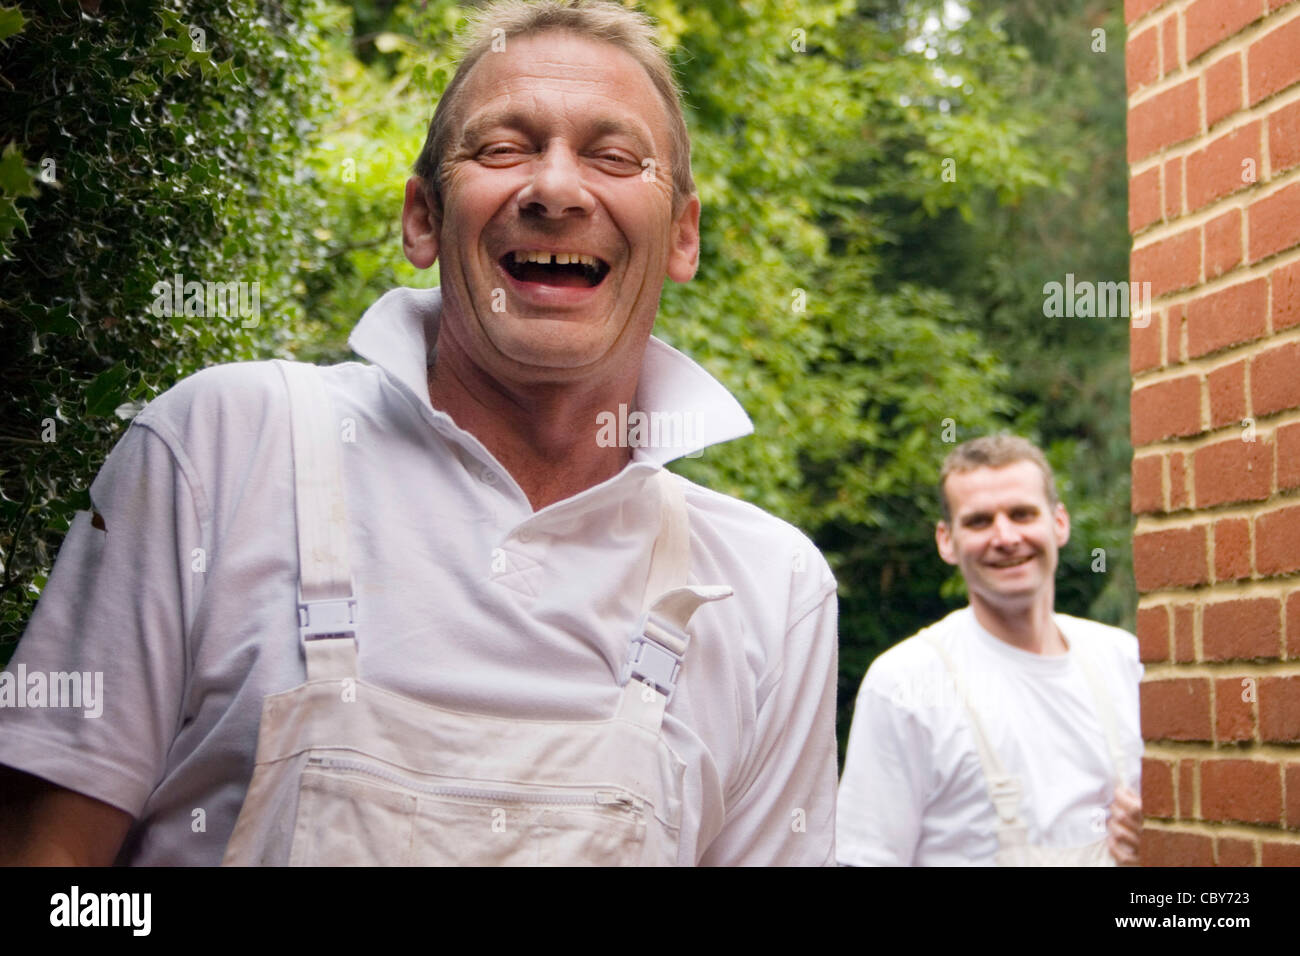 portrait two happy labourers wearing overalls to paint and decorate property Stock Photo